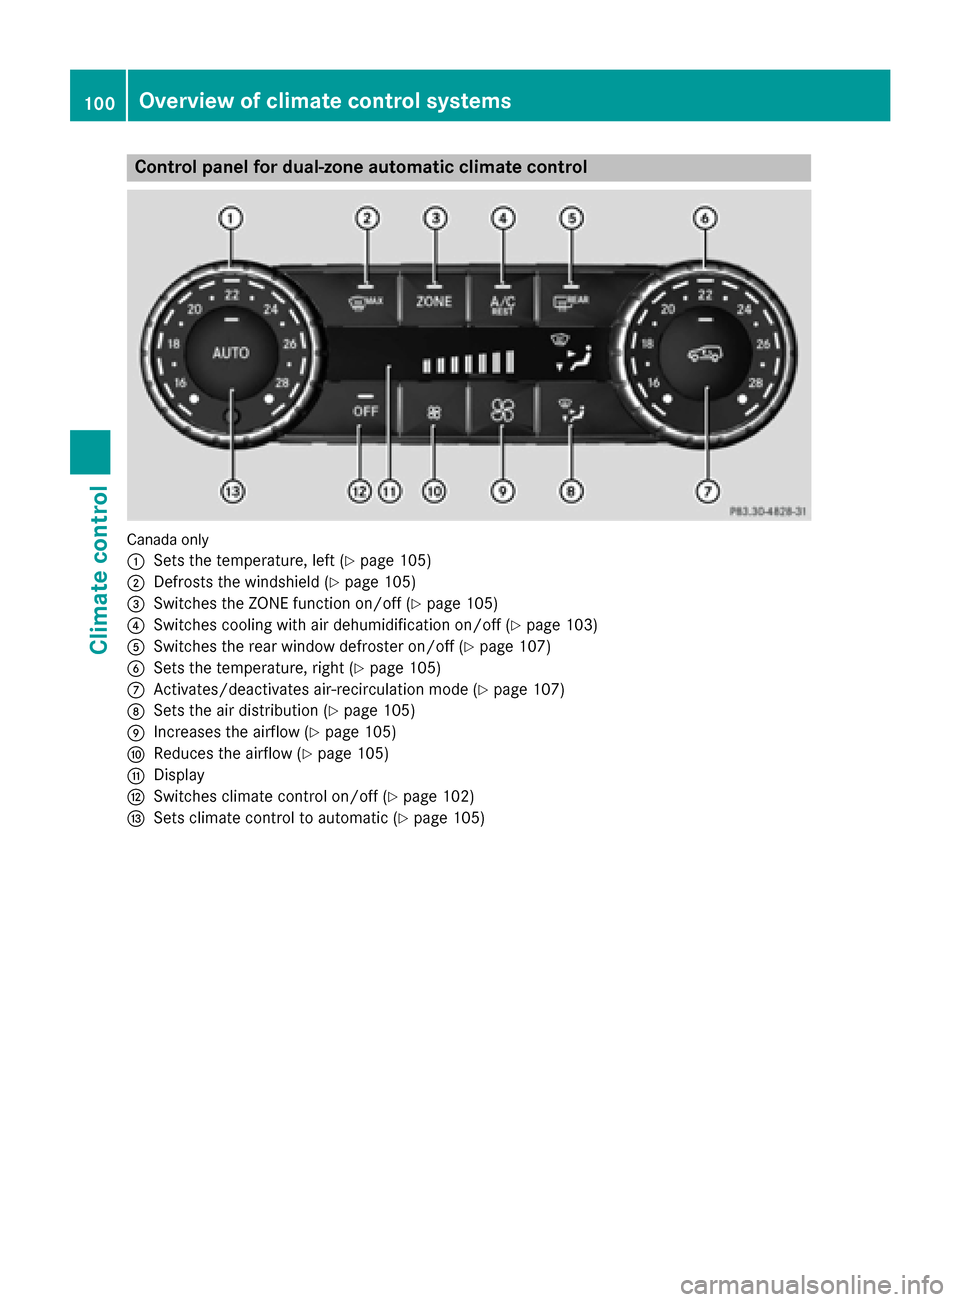 MERCEDES-BENZ G-Class 2016 W463 Owners Manual Control panel for dual-zone automatic climate control
Canadaonly
:
Sets the temperature, left (Ypage 105)
;Defrosts the windshield (Ypage 105)
=Switches the ZONE function on/off (Ypage 105)
?Switches 